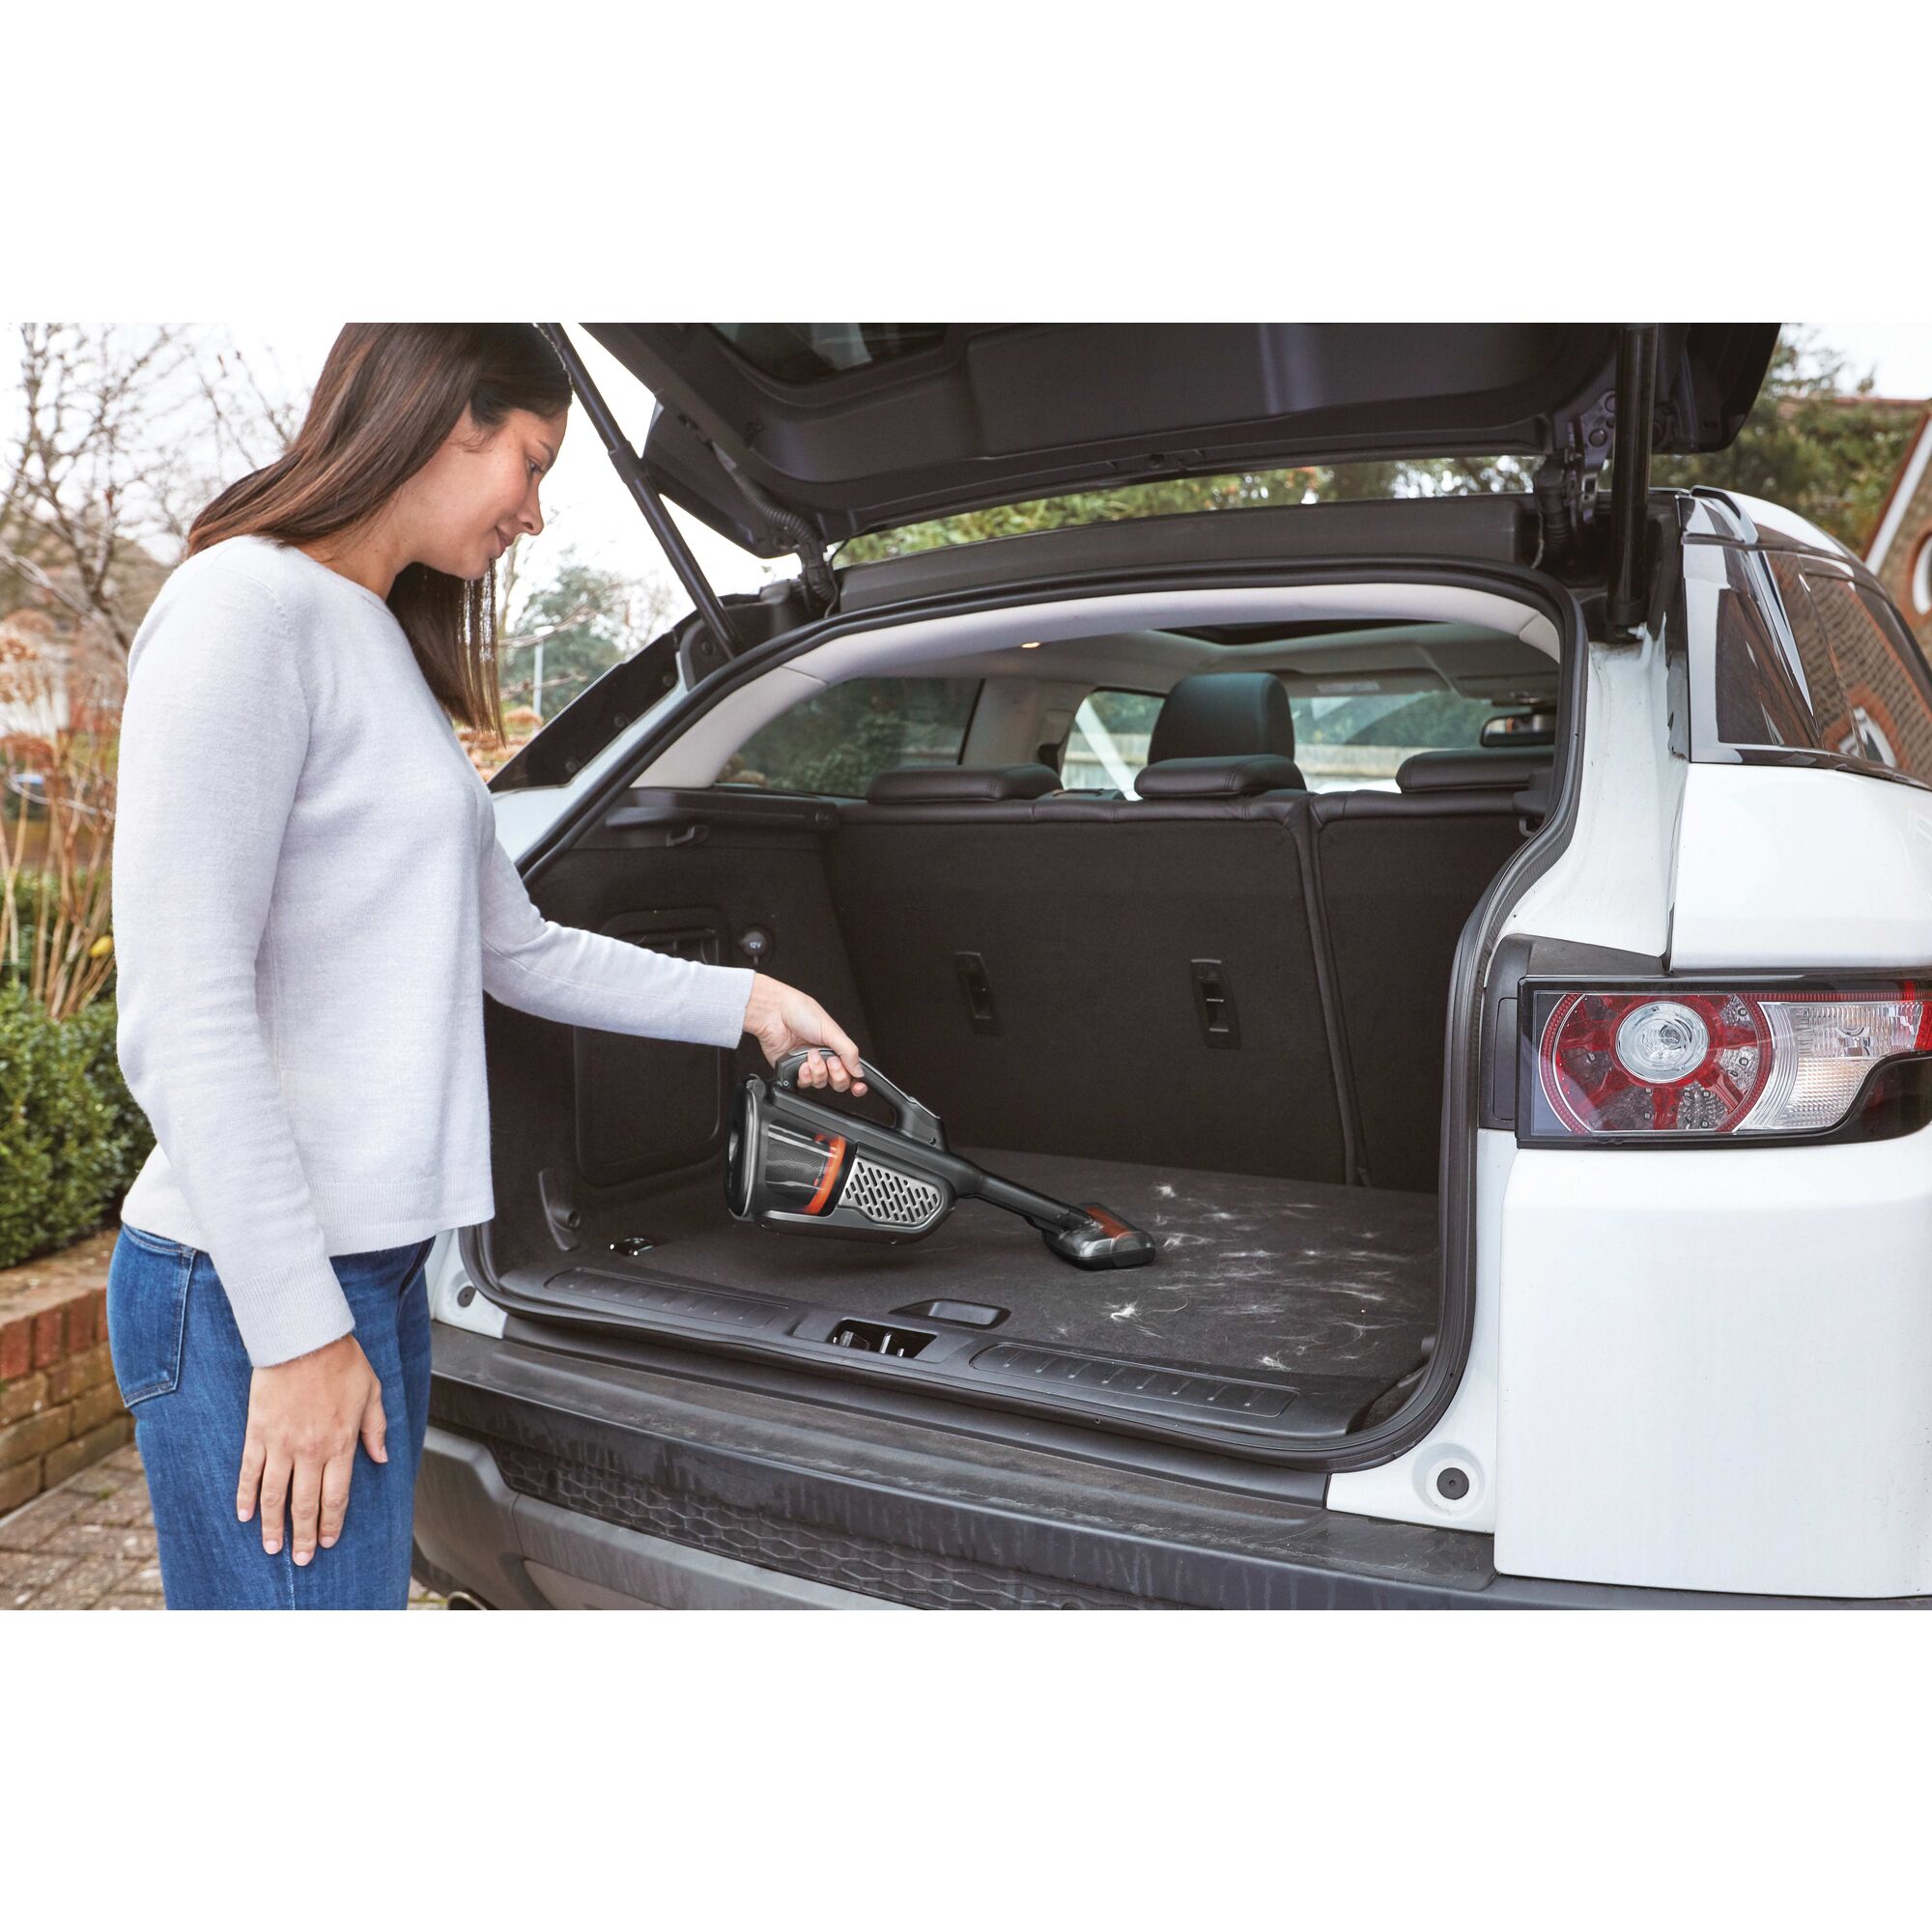 12 volt MAX dustbuster AdvancedClean cordless hand vacuum with powered pet head being used by a person to clean car trunk.